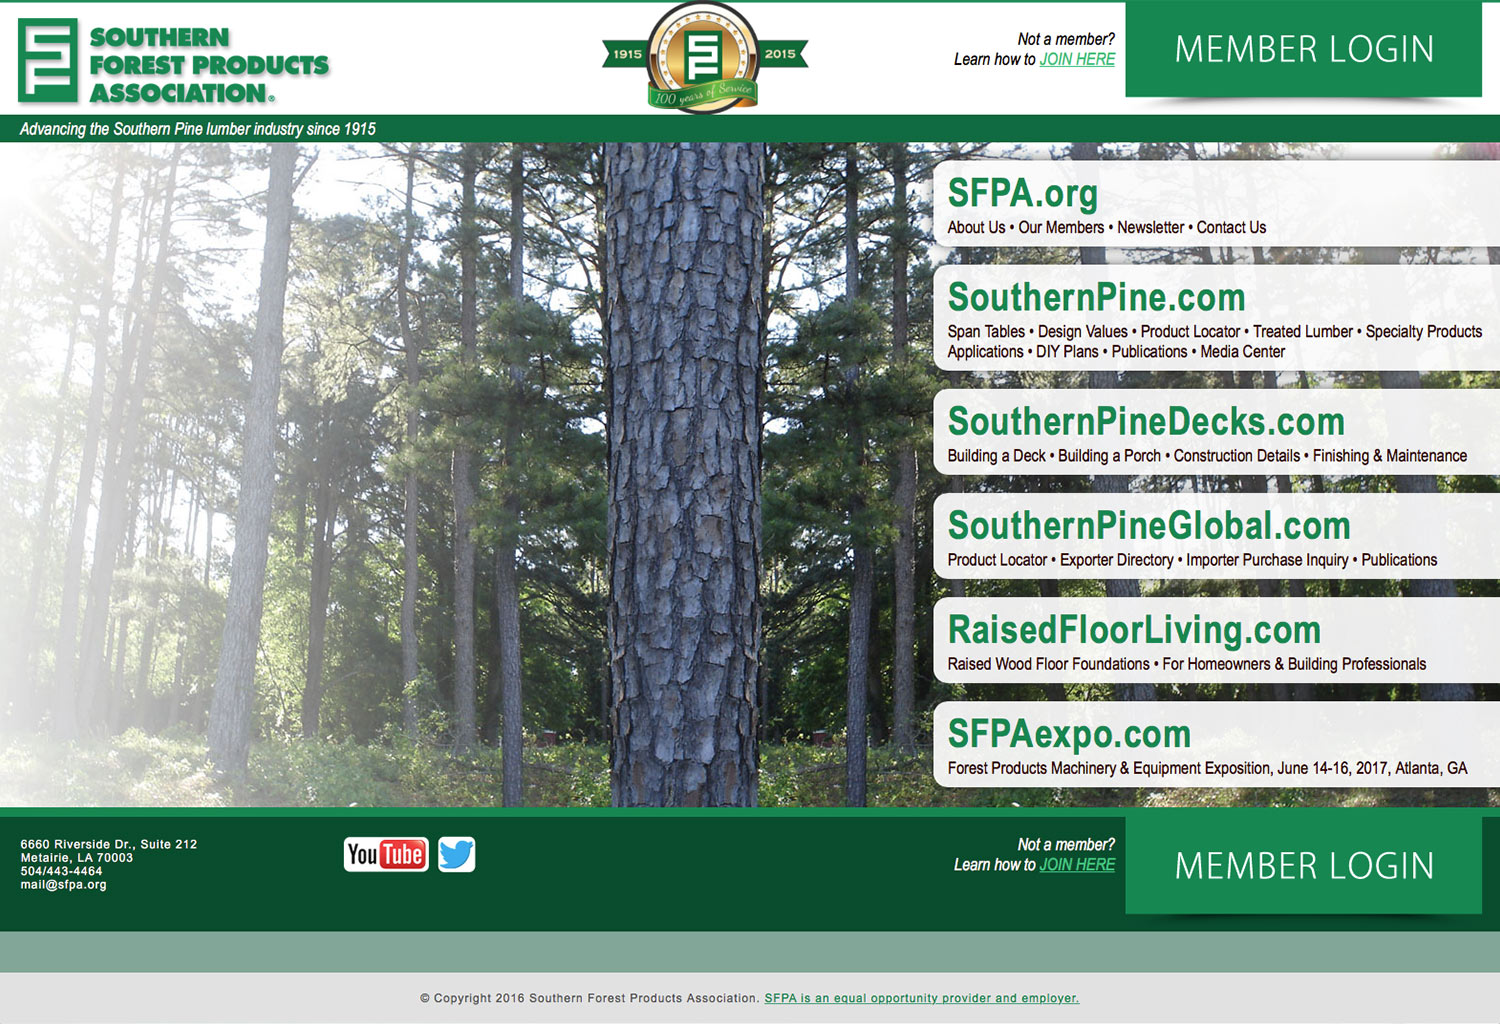 Southern Forest Products Association Website Design | Louisiana | MDG